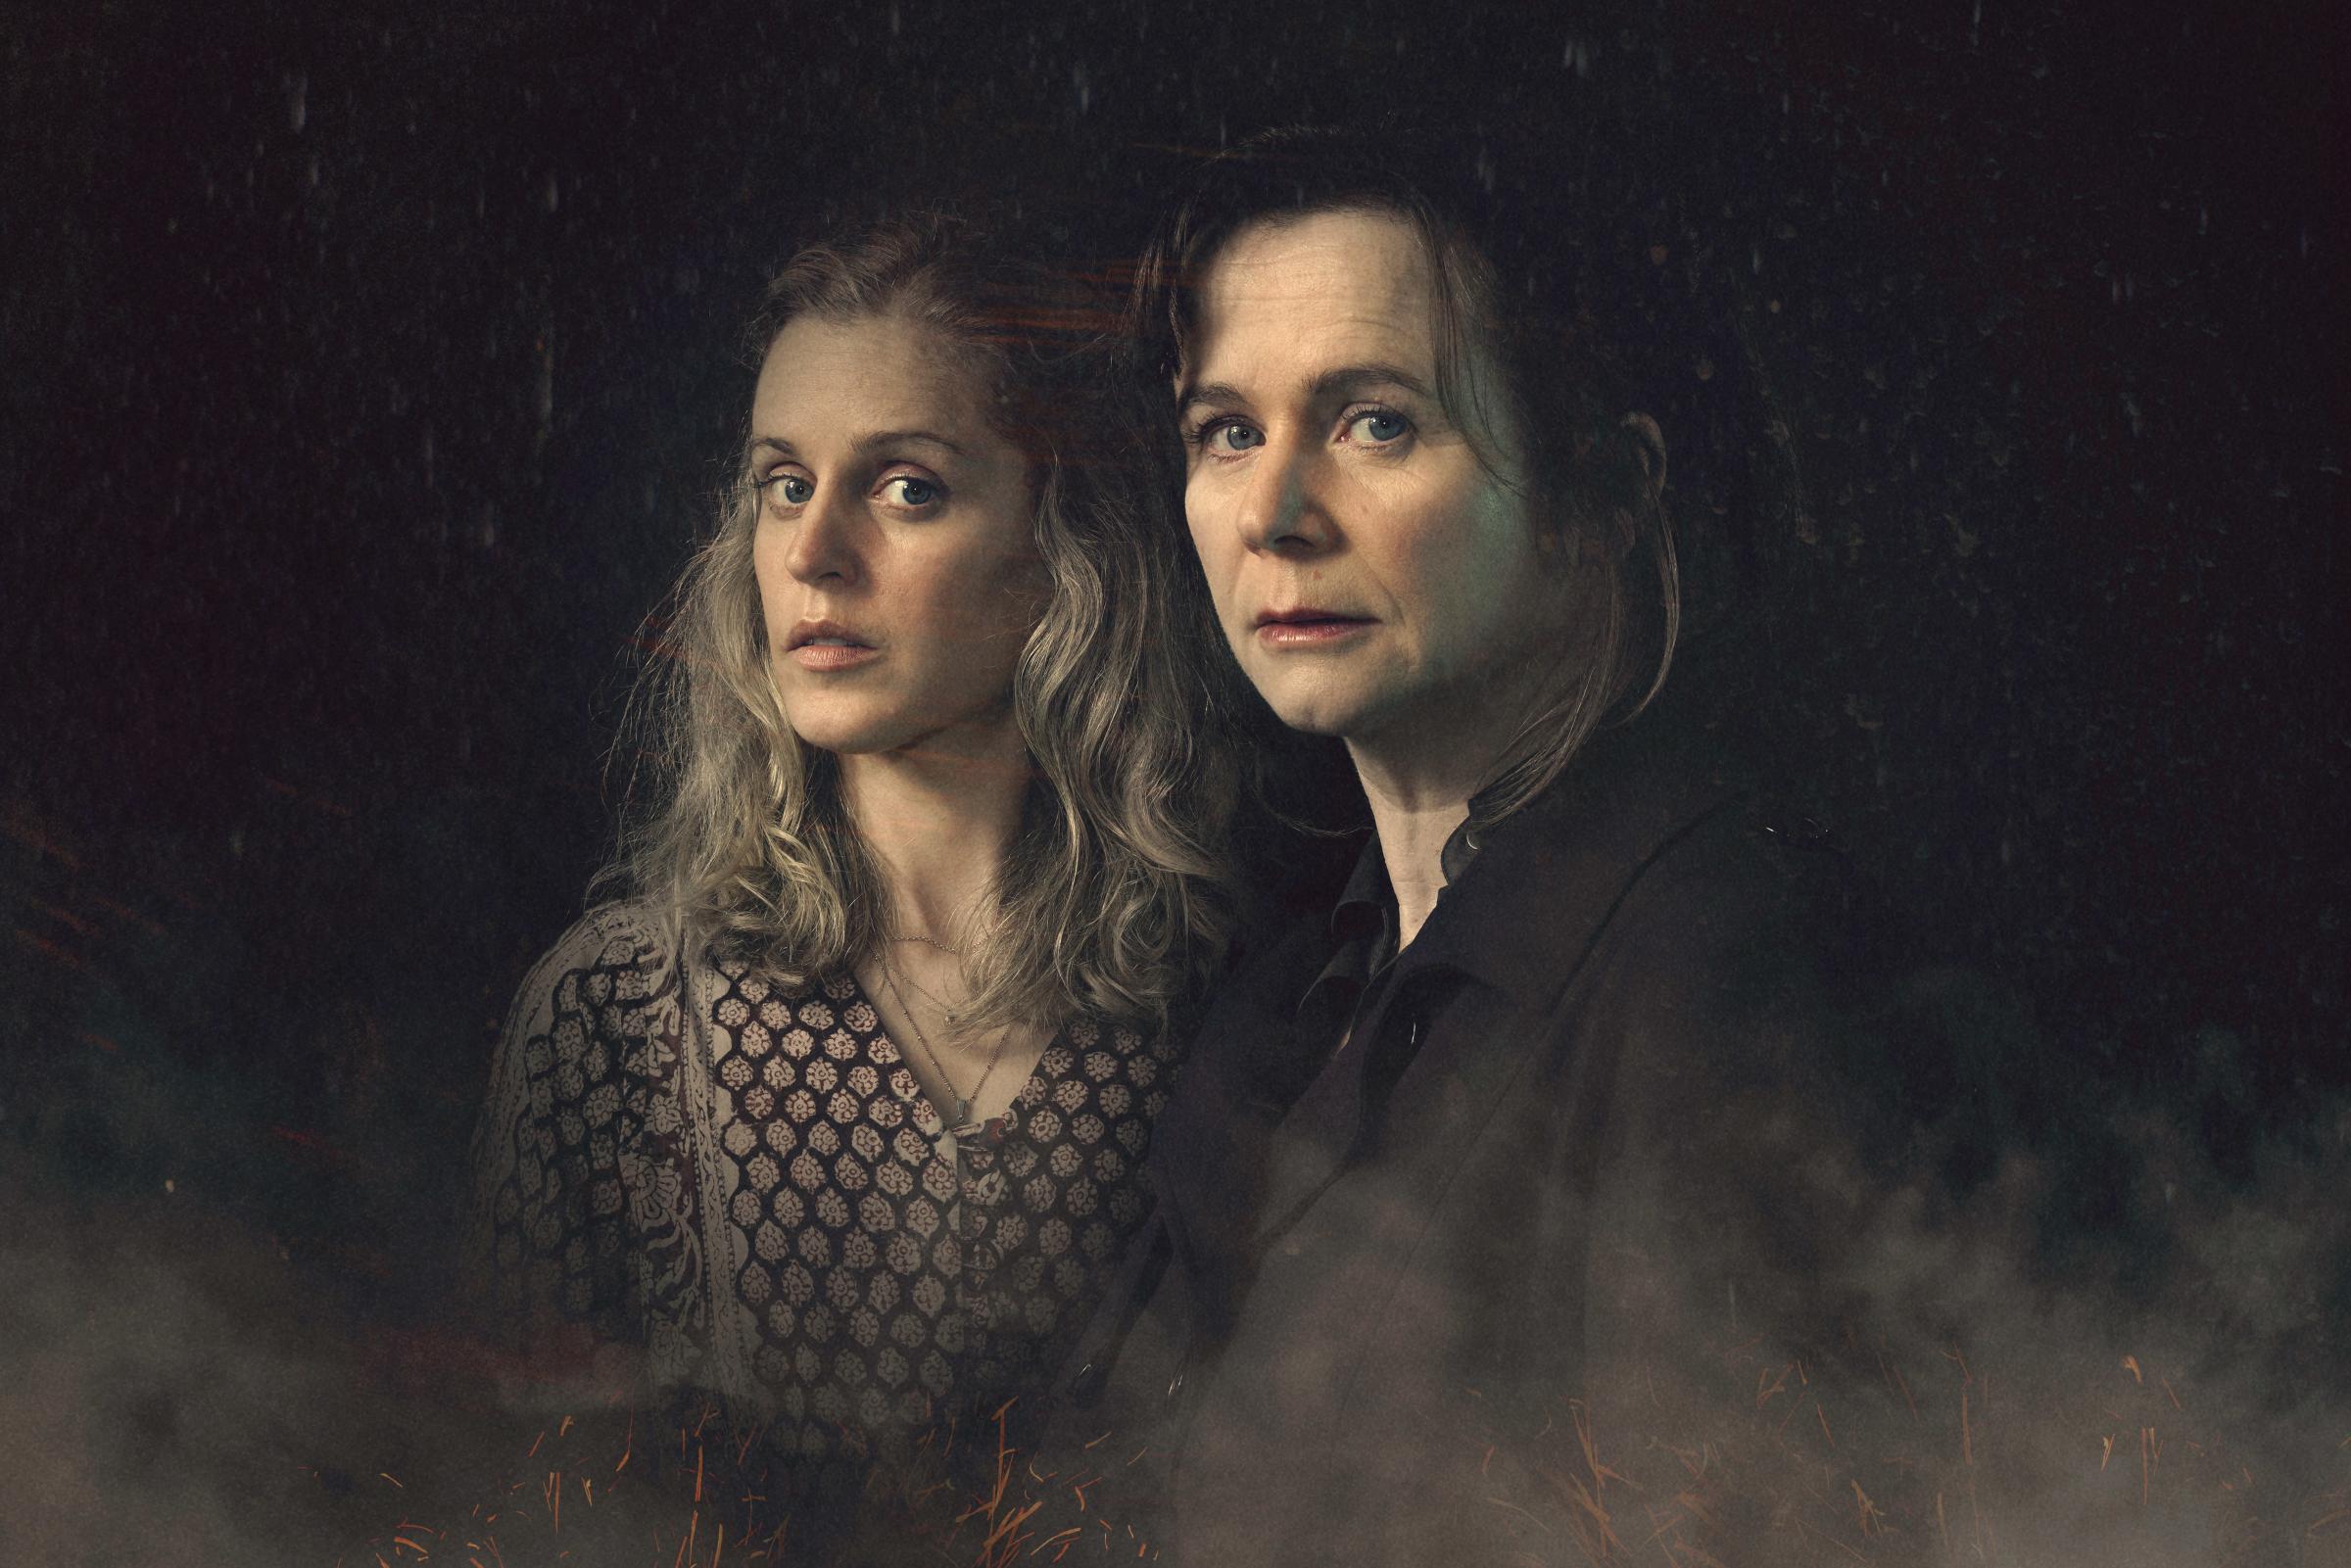 Too Close with Emily Watson as Dr Emma Robertson and Denise Gough as Connie Mortensen